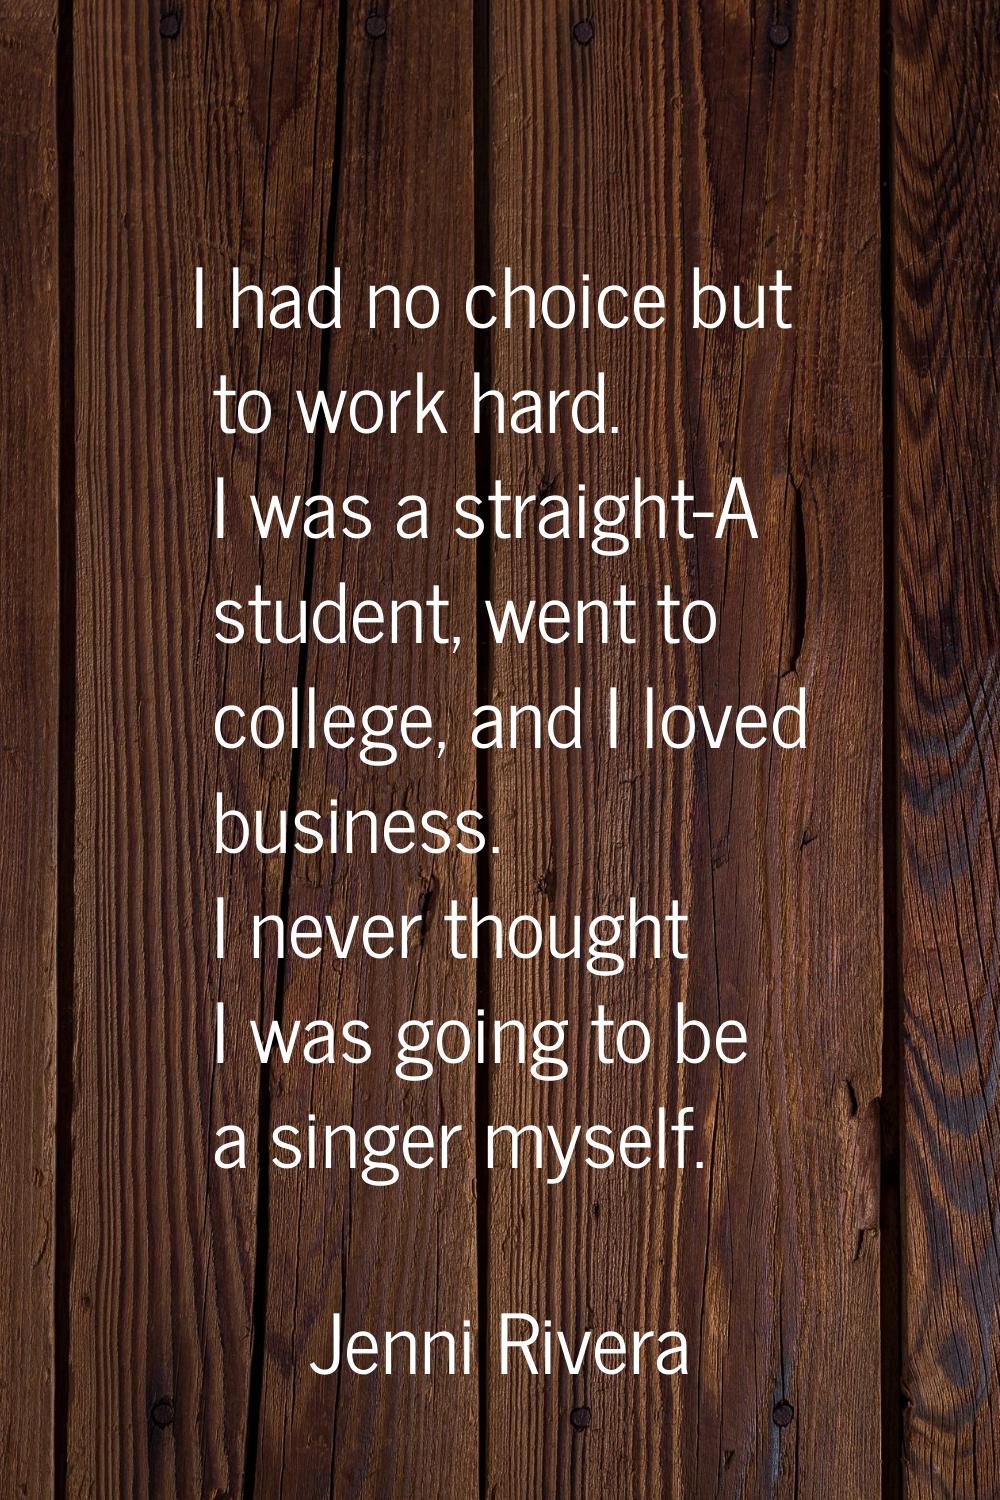 I had no choice but to work hard. I was a straight-A student, went to college, and I loved business